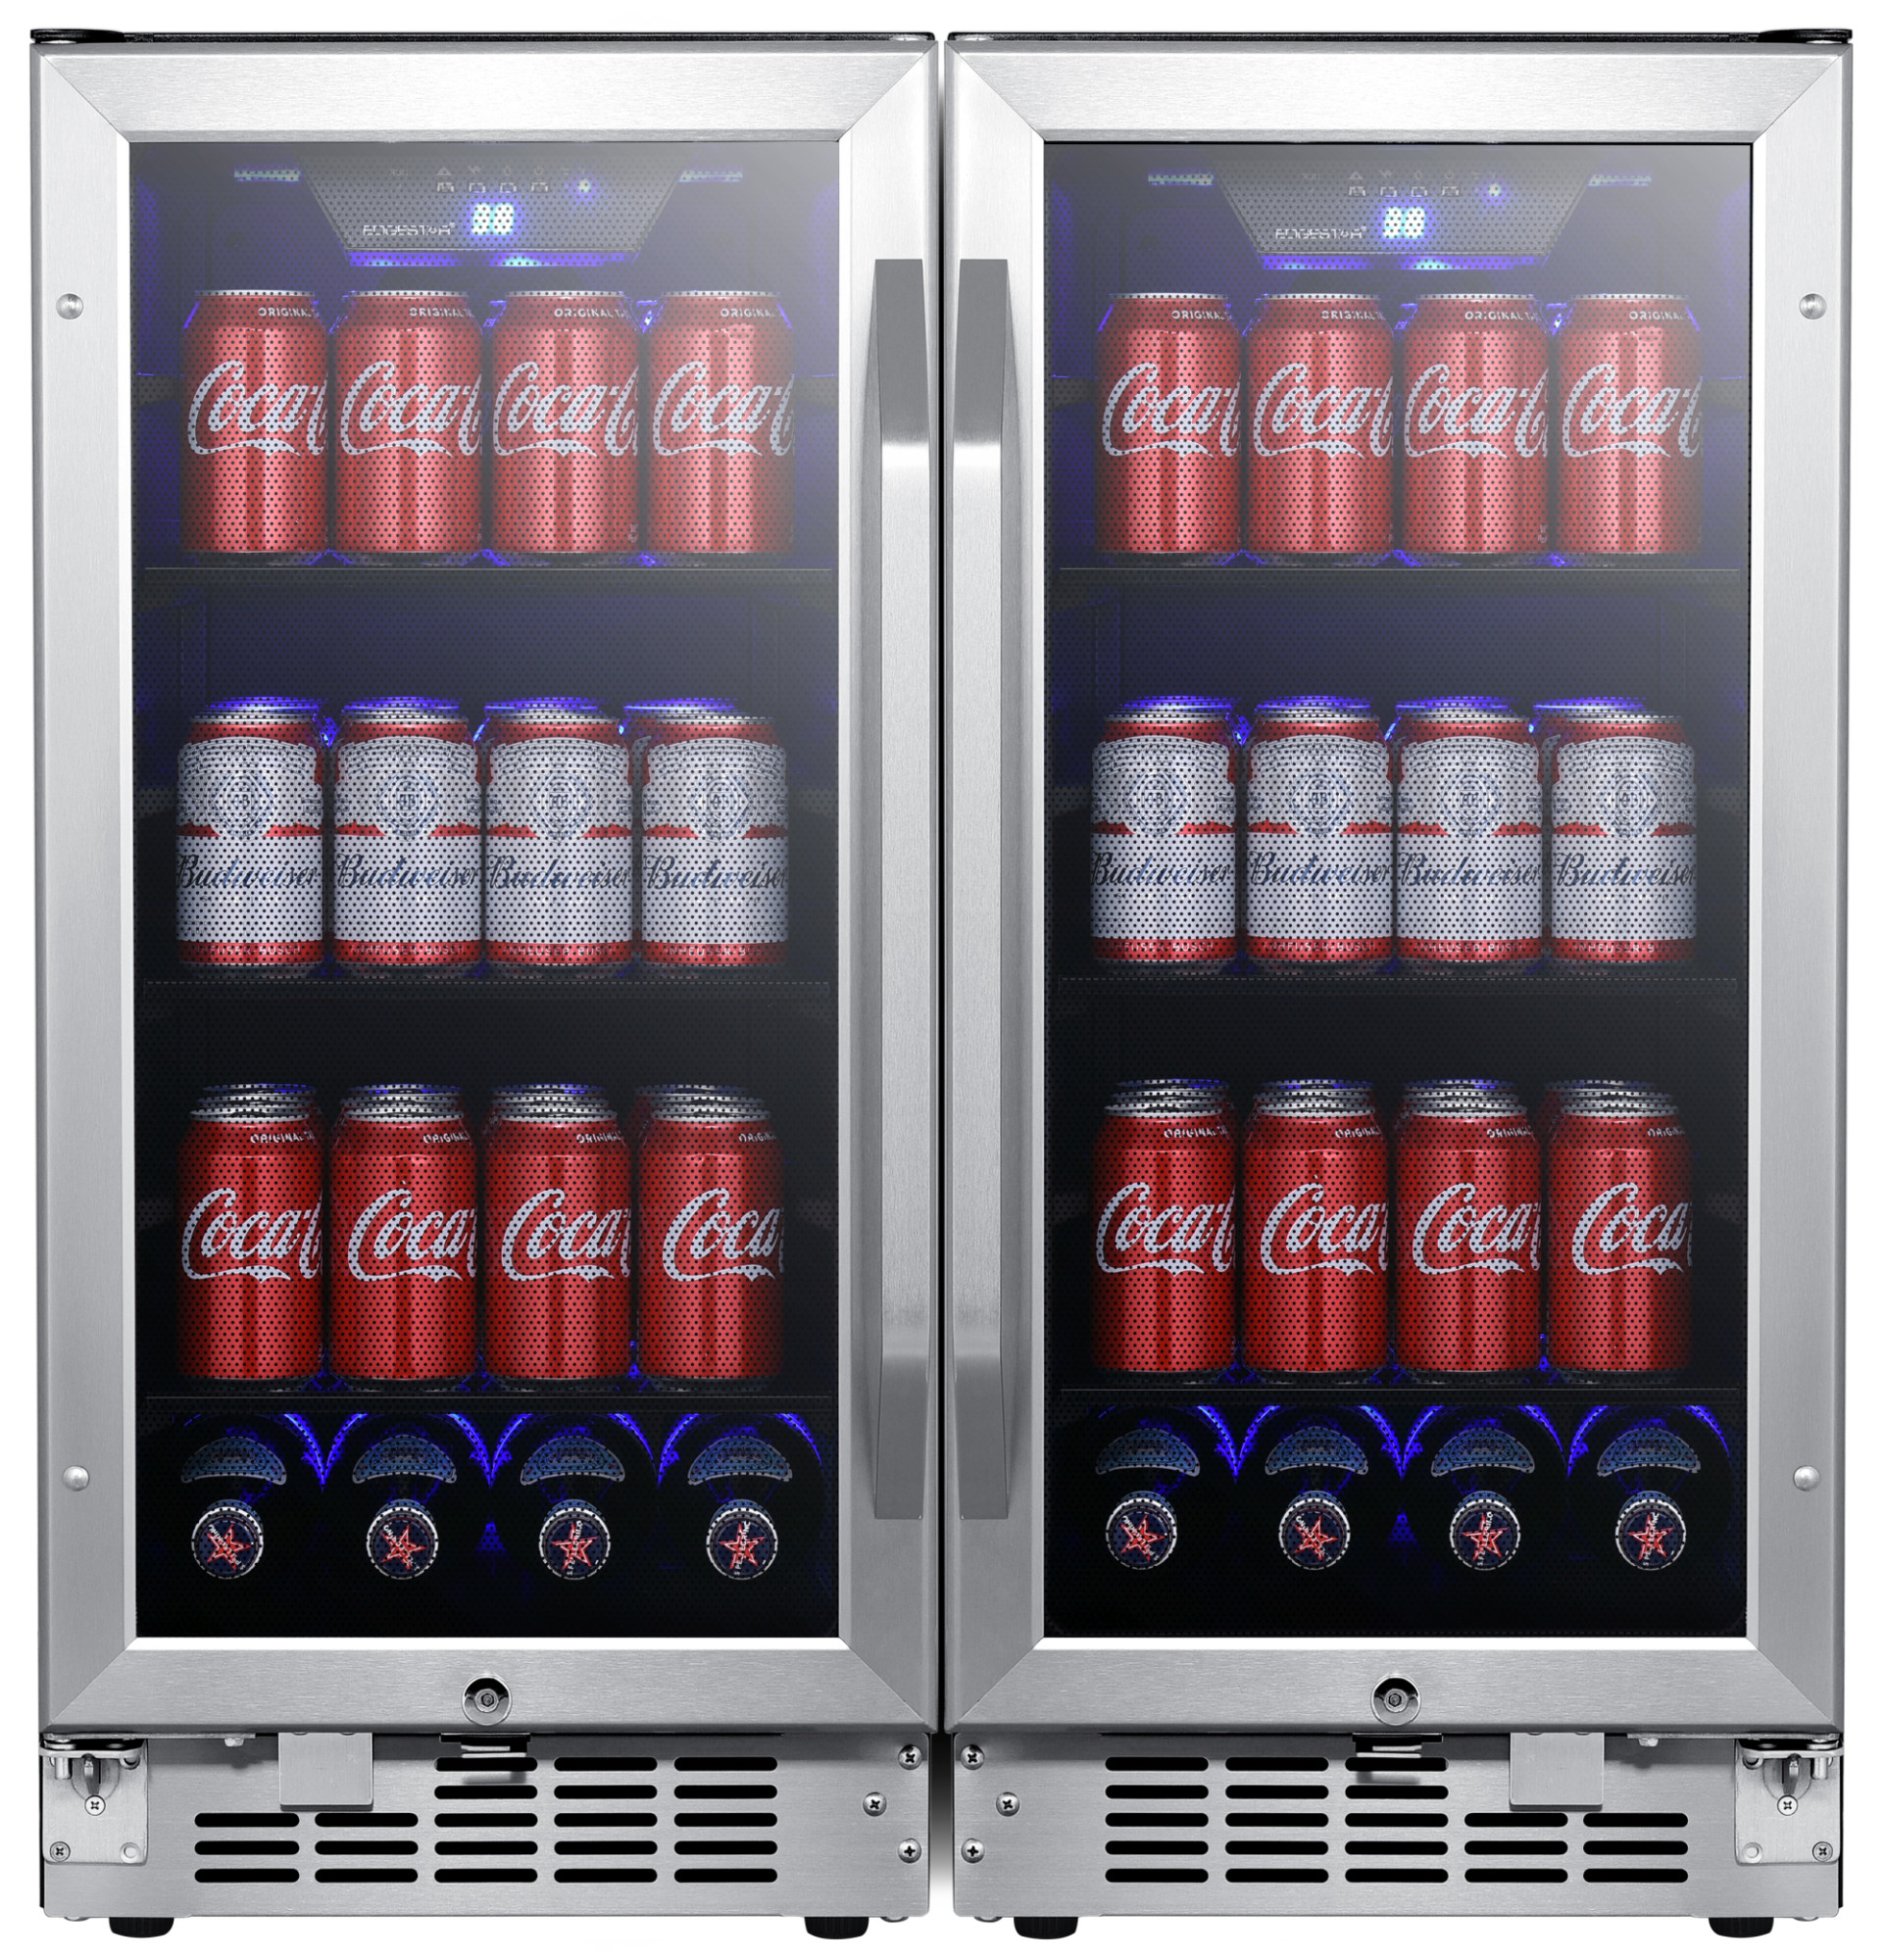 Edgestar Cbr902sgdual 30" Wide 160 Can Built-In Side By Side Beverage Cooler - Stainless - image 1 of 2